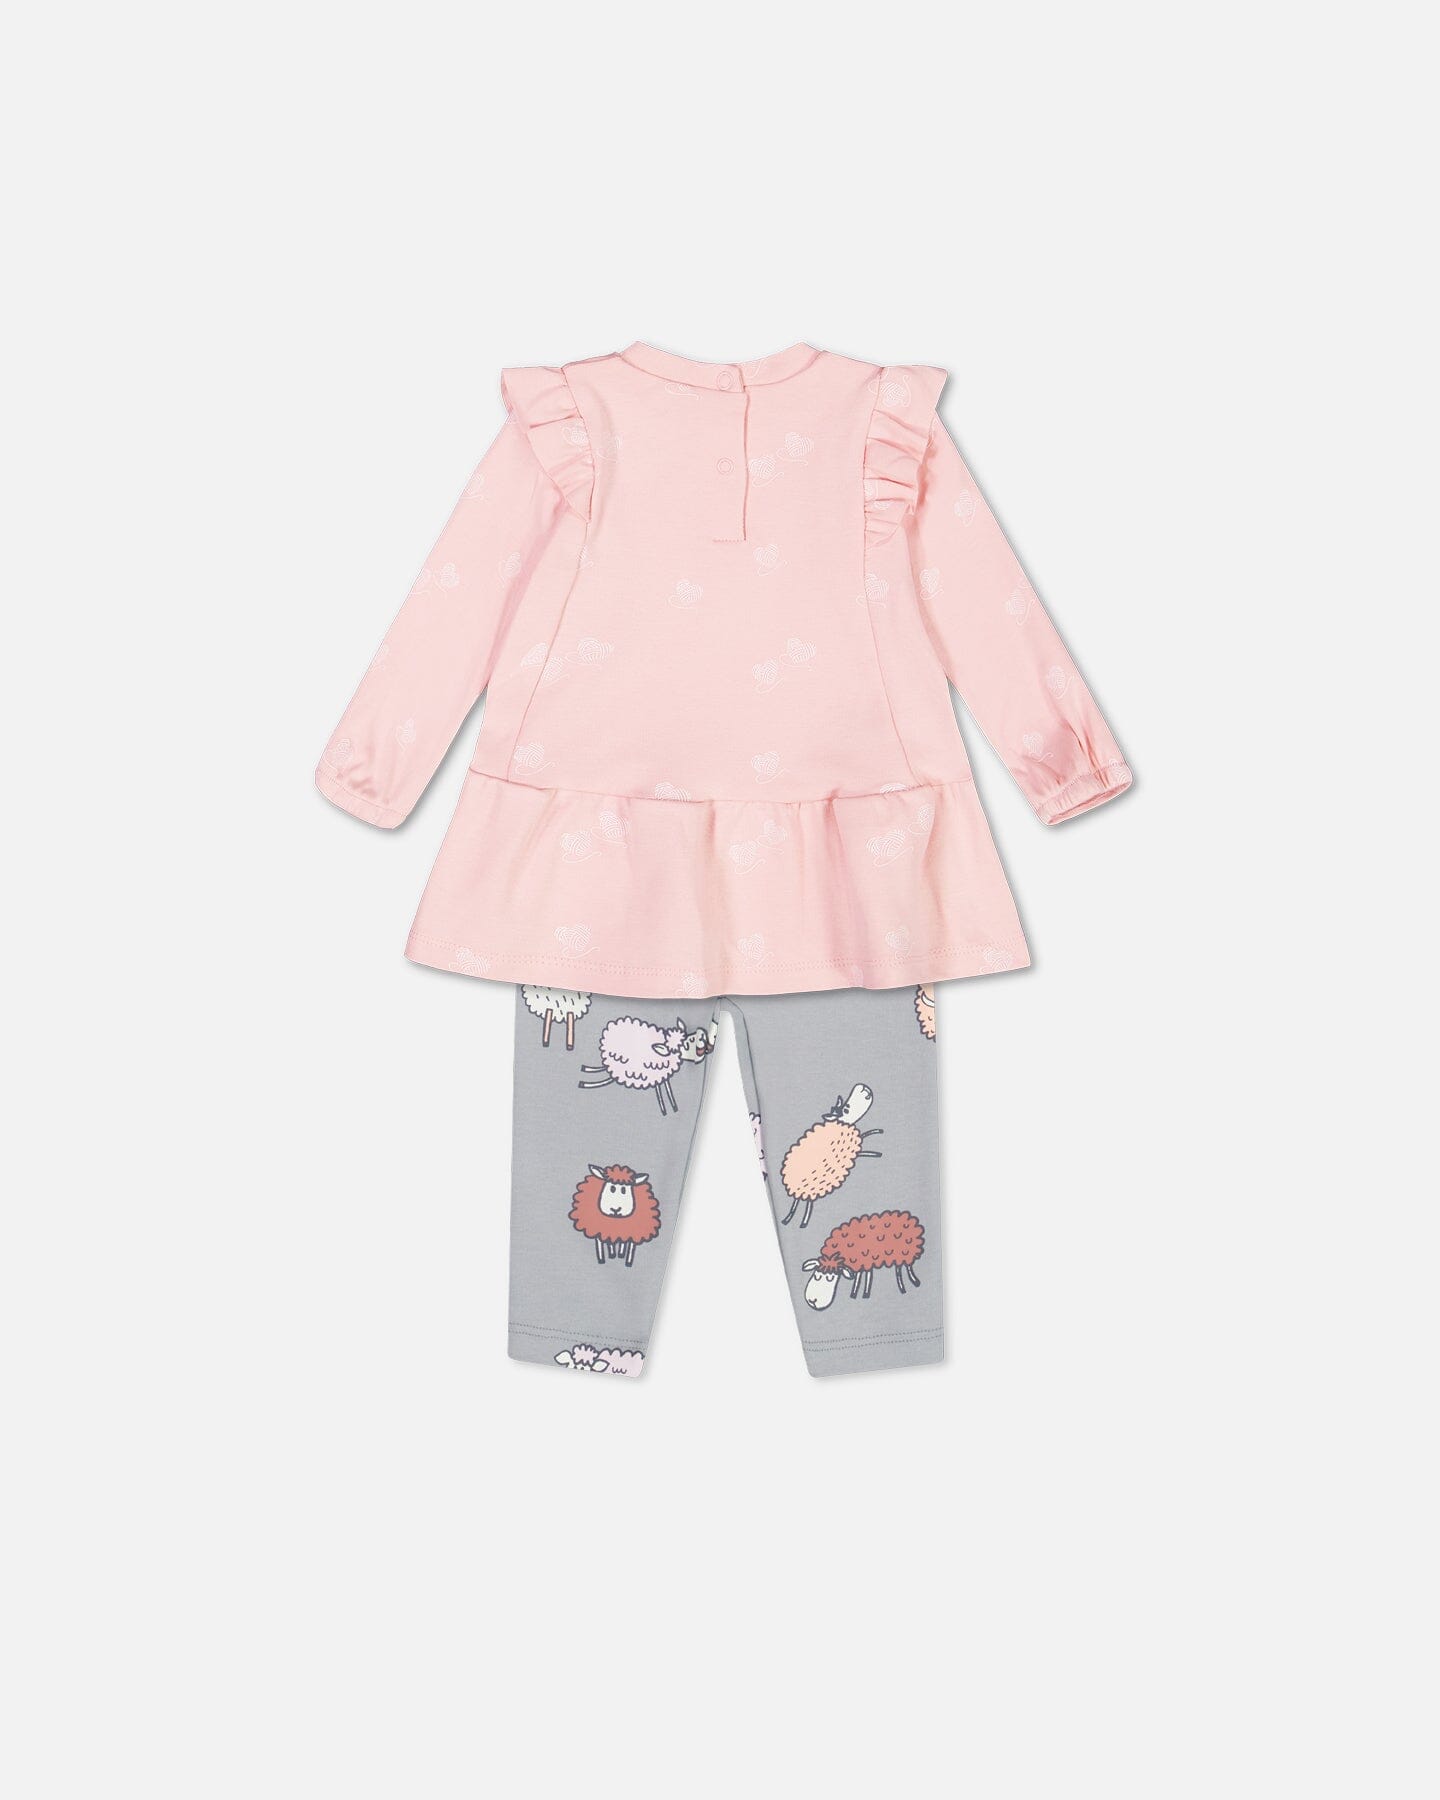 Organic Cotton Printed Long Tunic And Legging Set Little Heart Of Wool And Sheep Print Sets Deux par Deux 